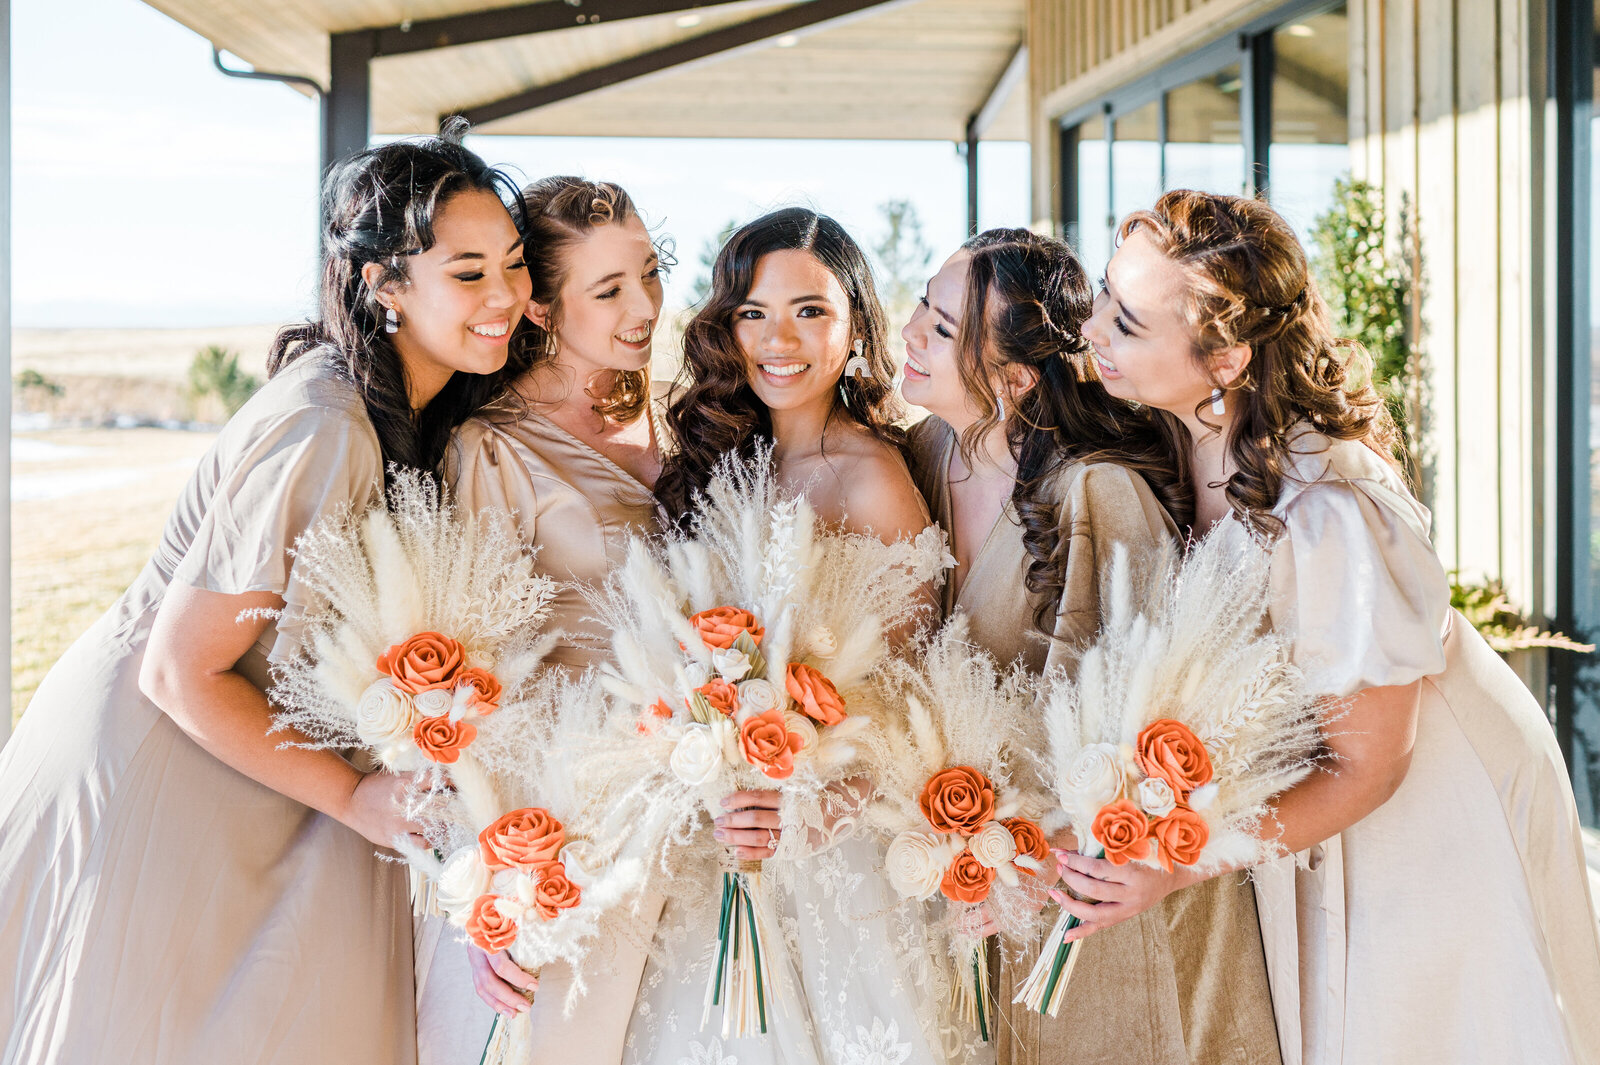 Bridal Party in beige chiffon dresses smiling together and looking at their bride while holding orange and beige flowers